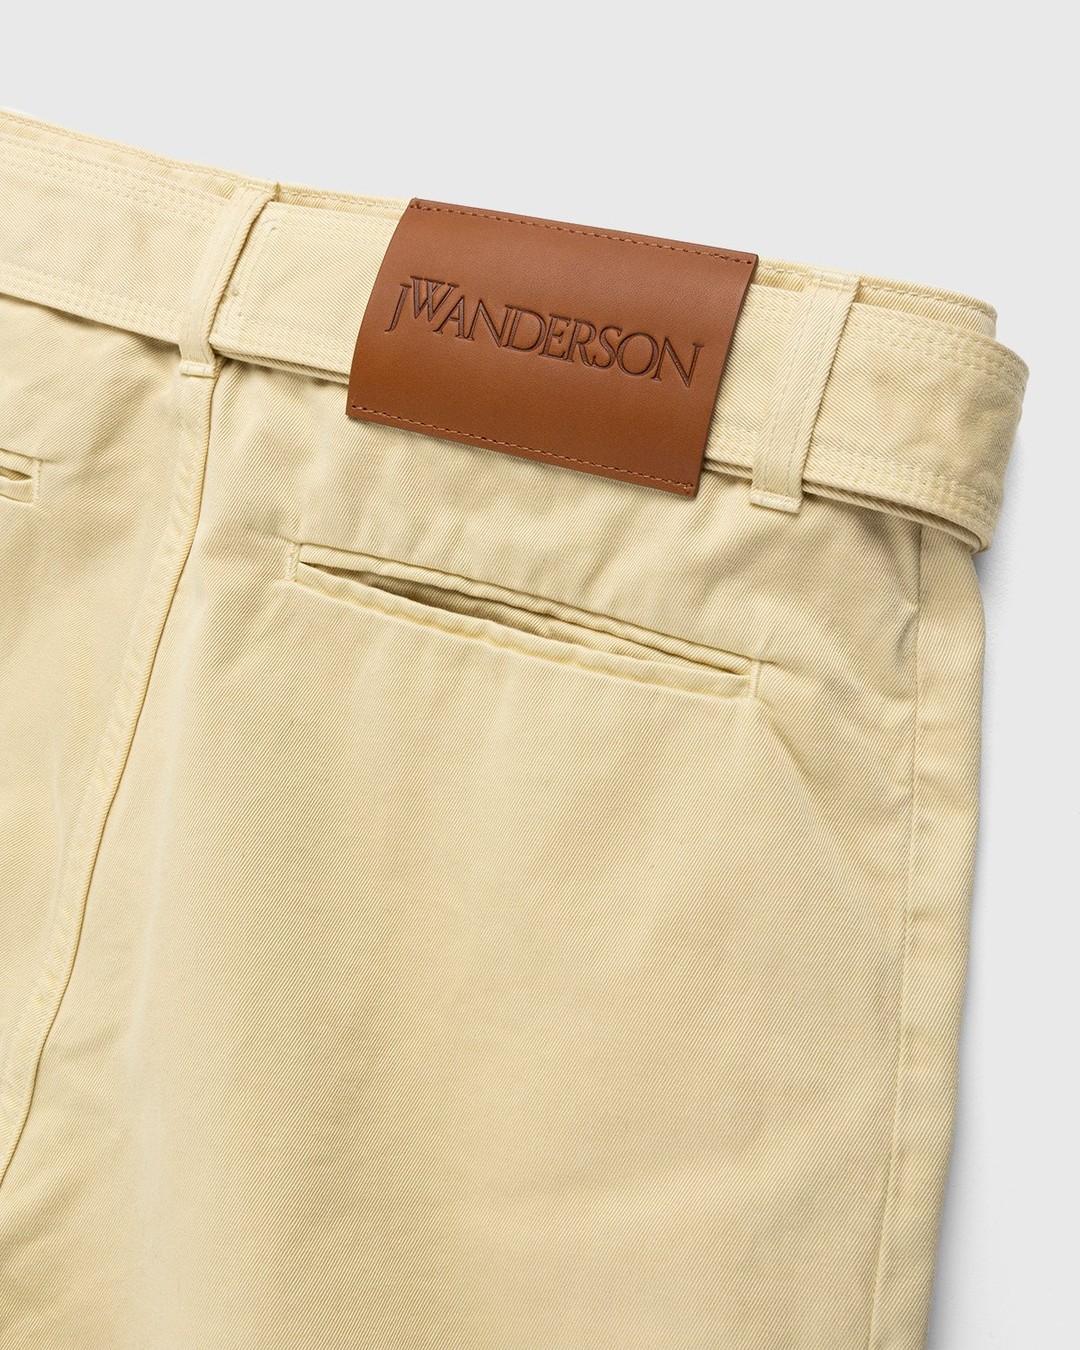 J.W. Anderson – Strawberry Chino Shorts Natural/Red - Short Cuts - Beige - Image 3